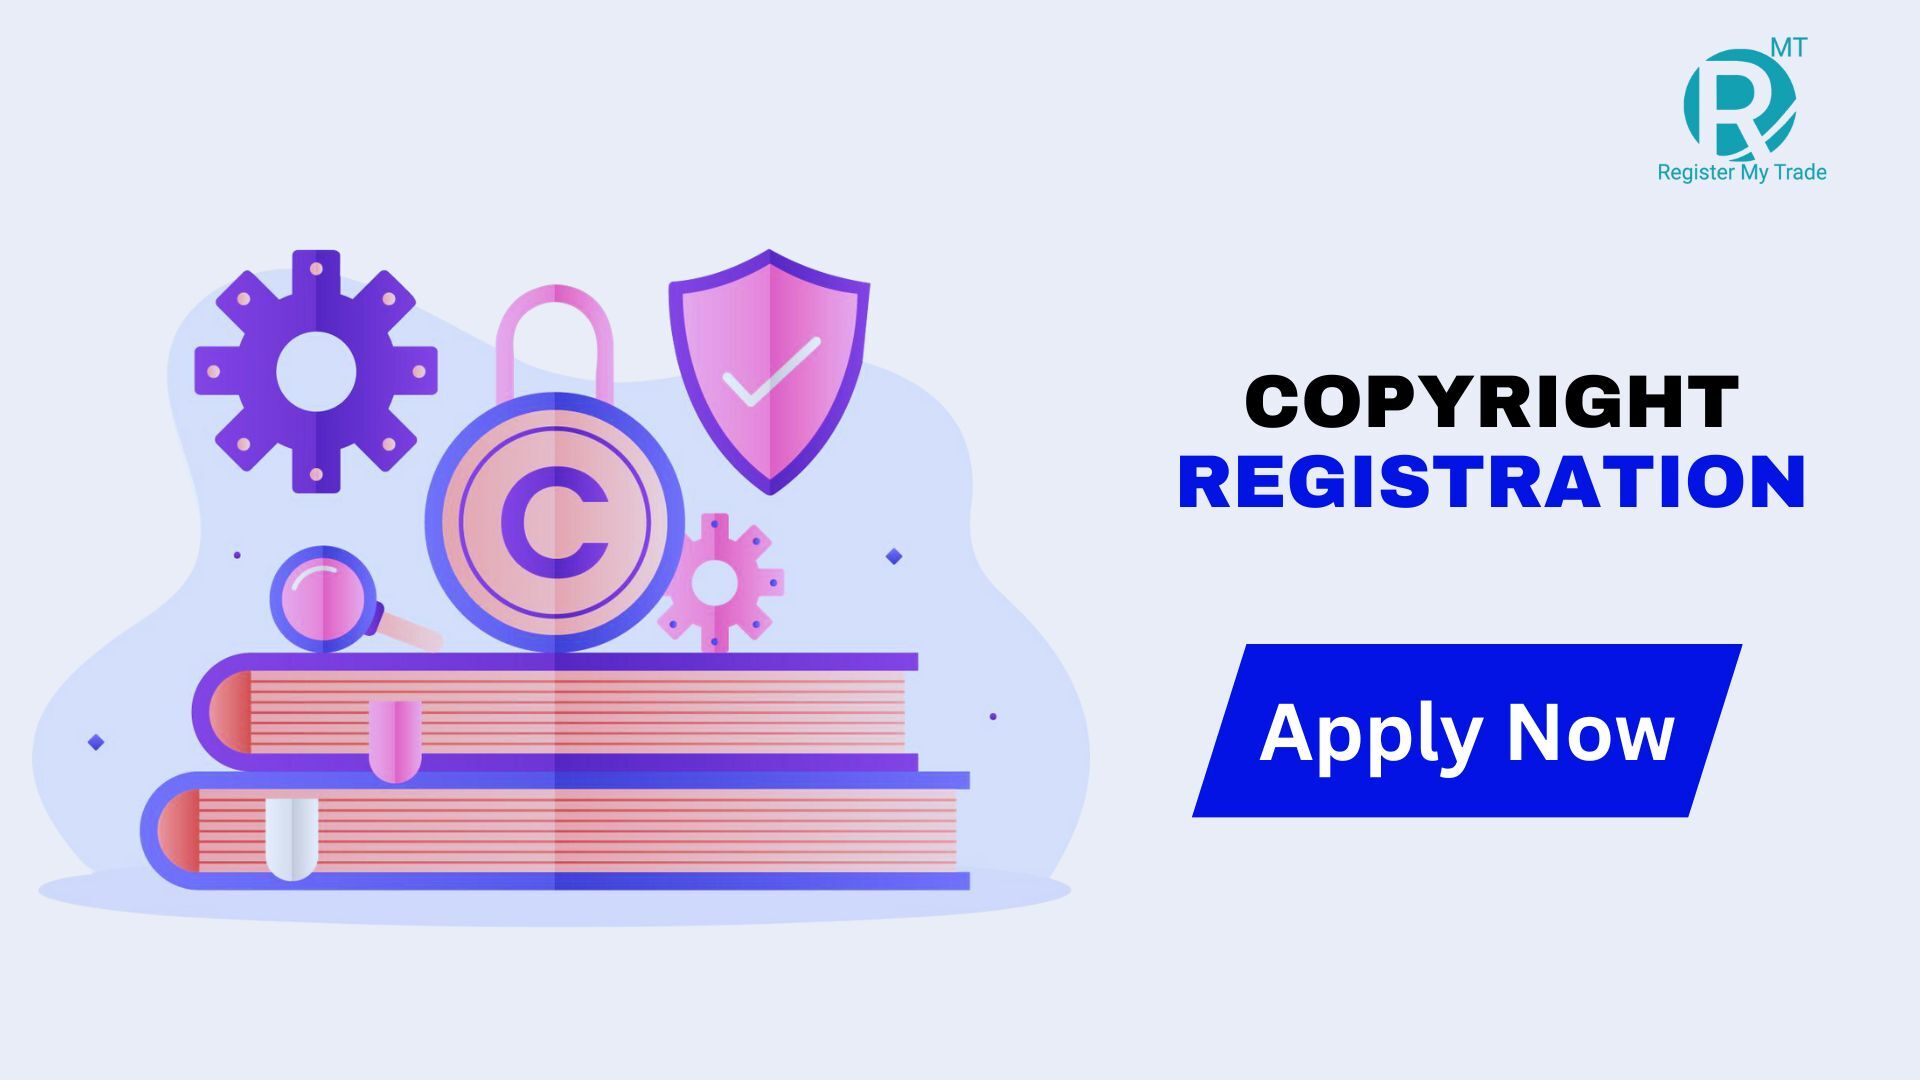 Register your Copyright with register my trade.